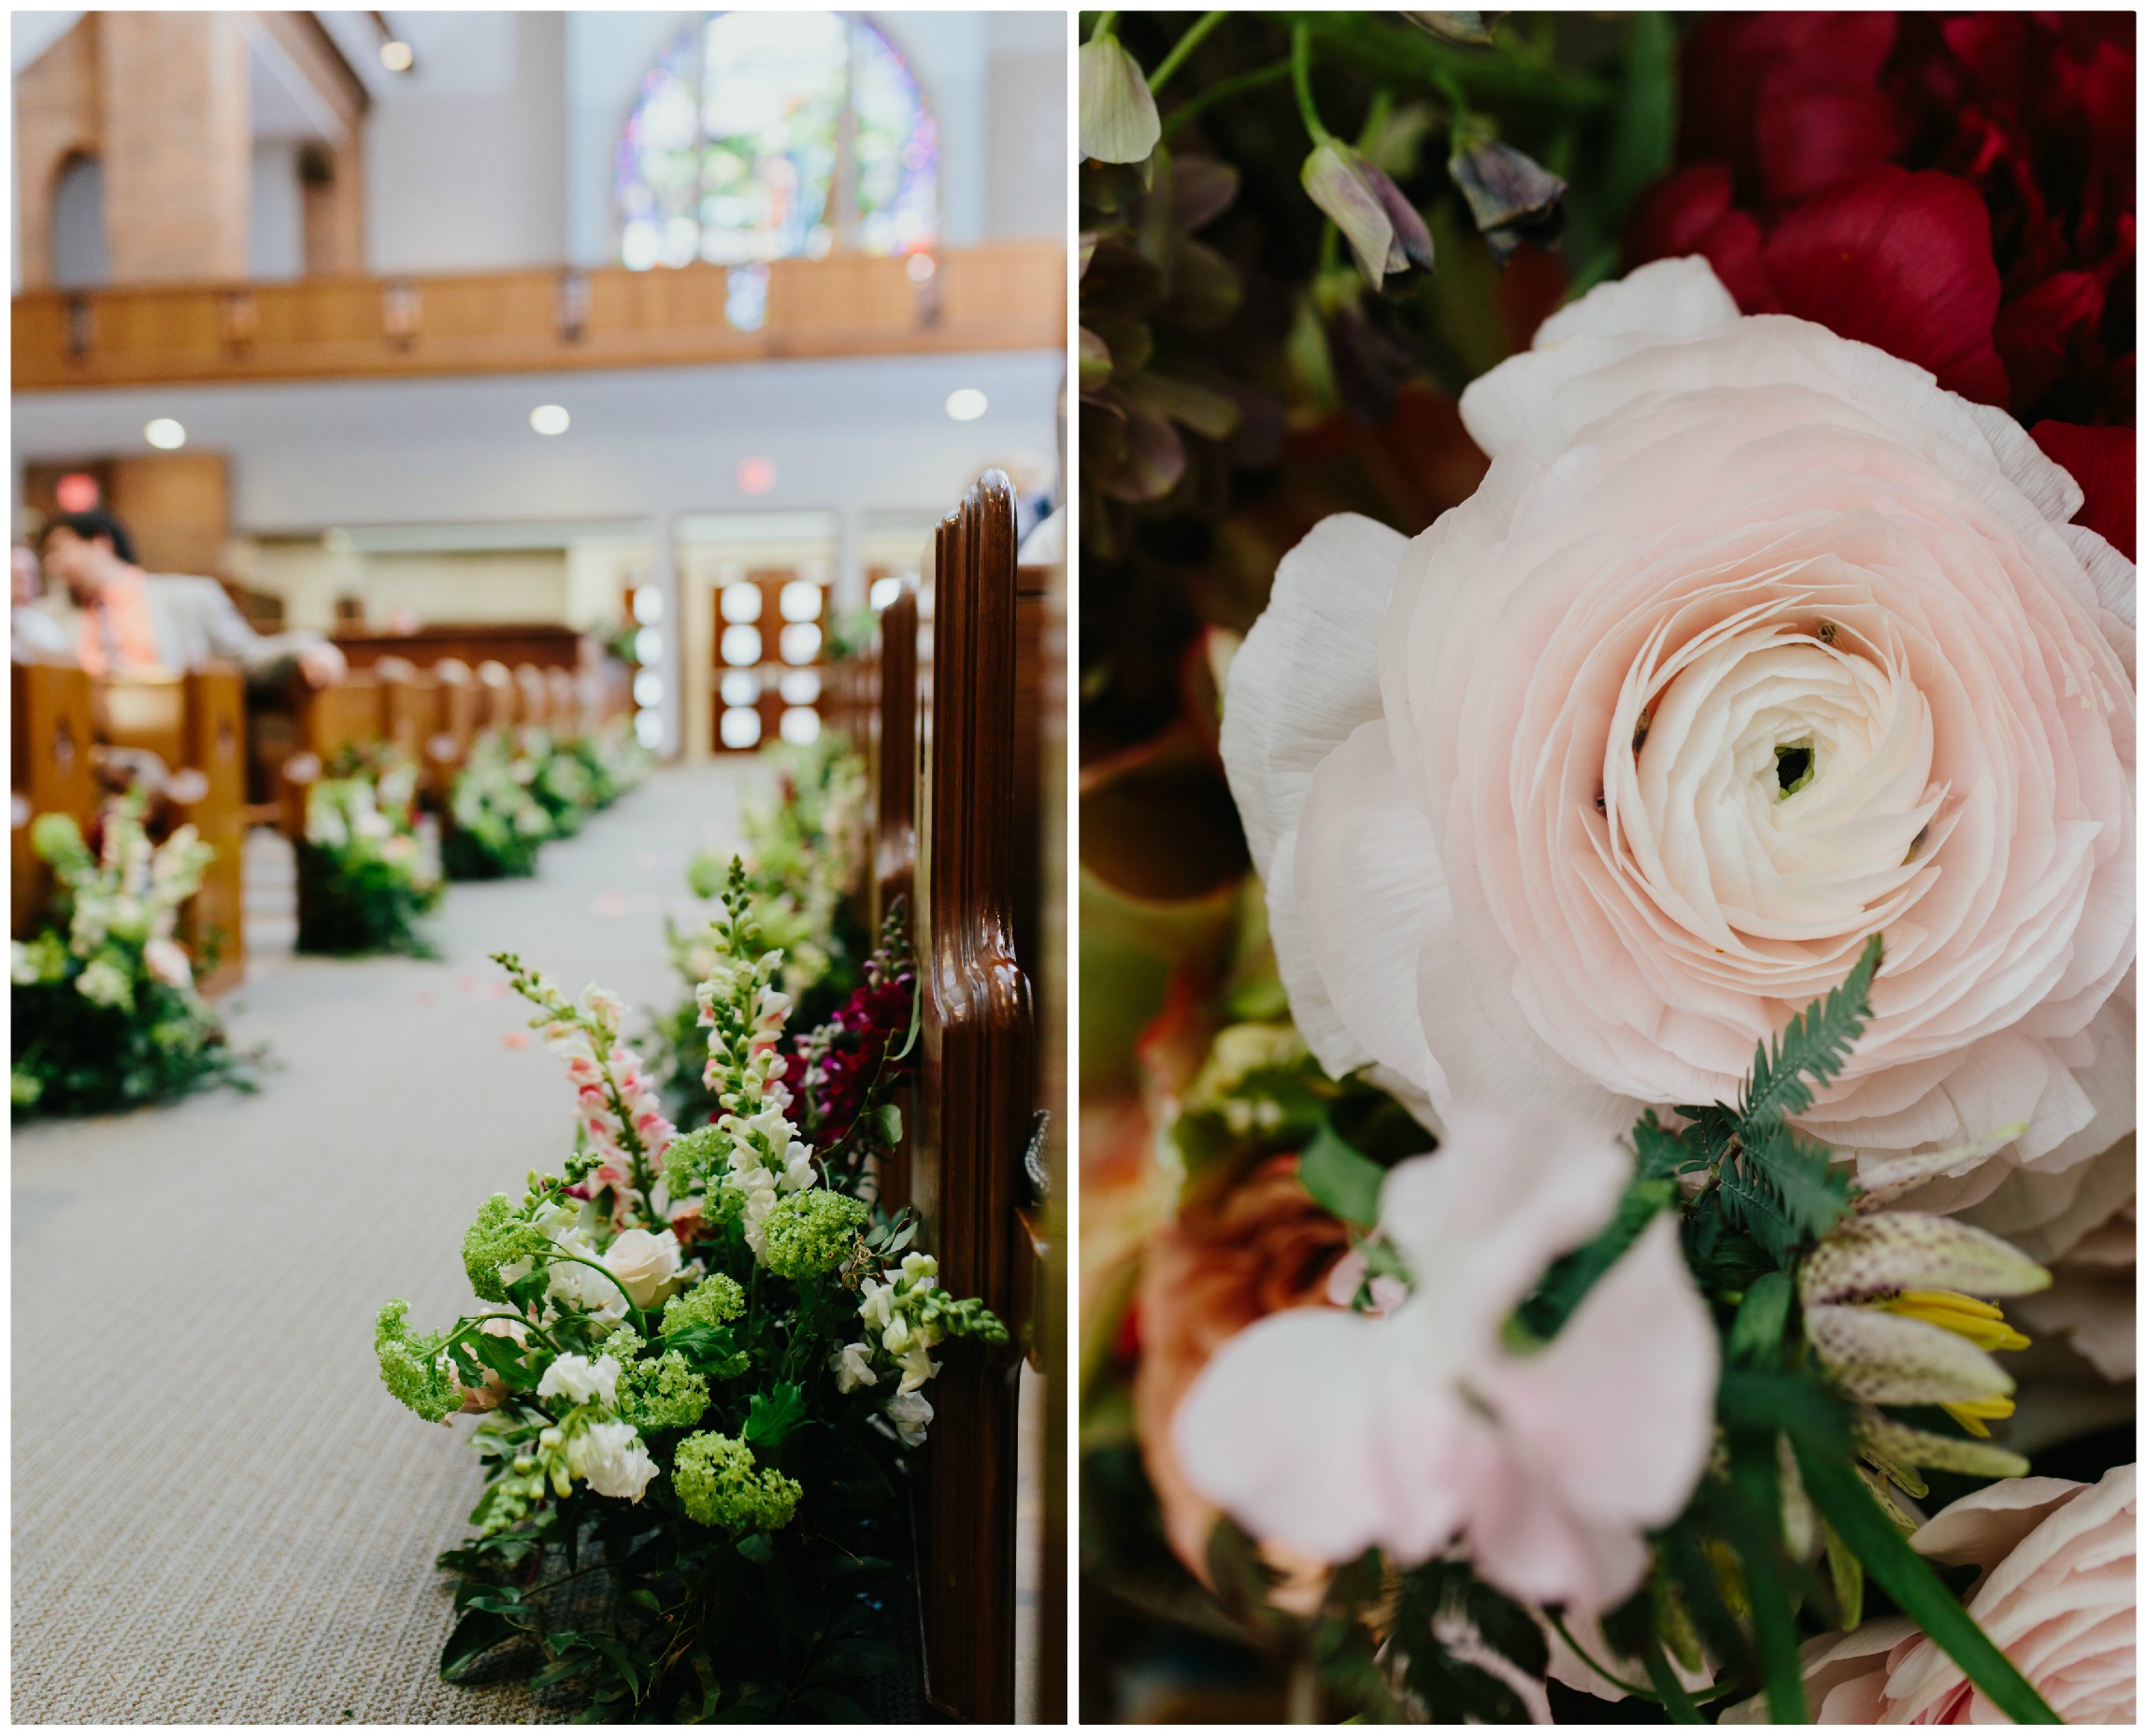 March Wedding Flowers | The Day's Design | Katie Grace Photography